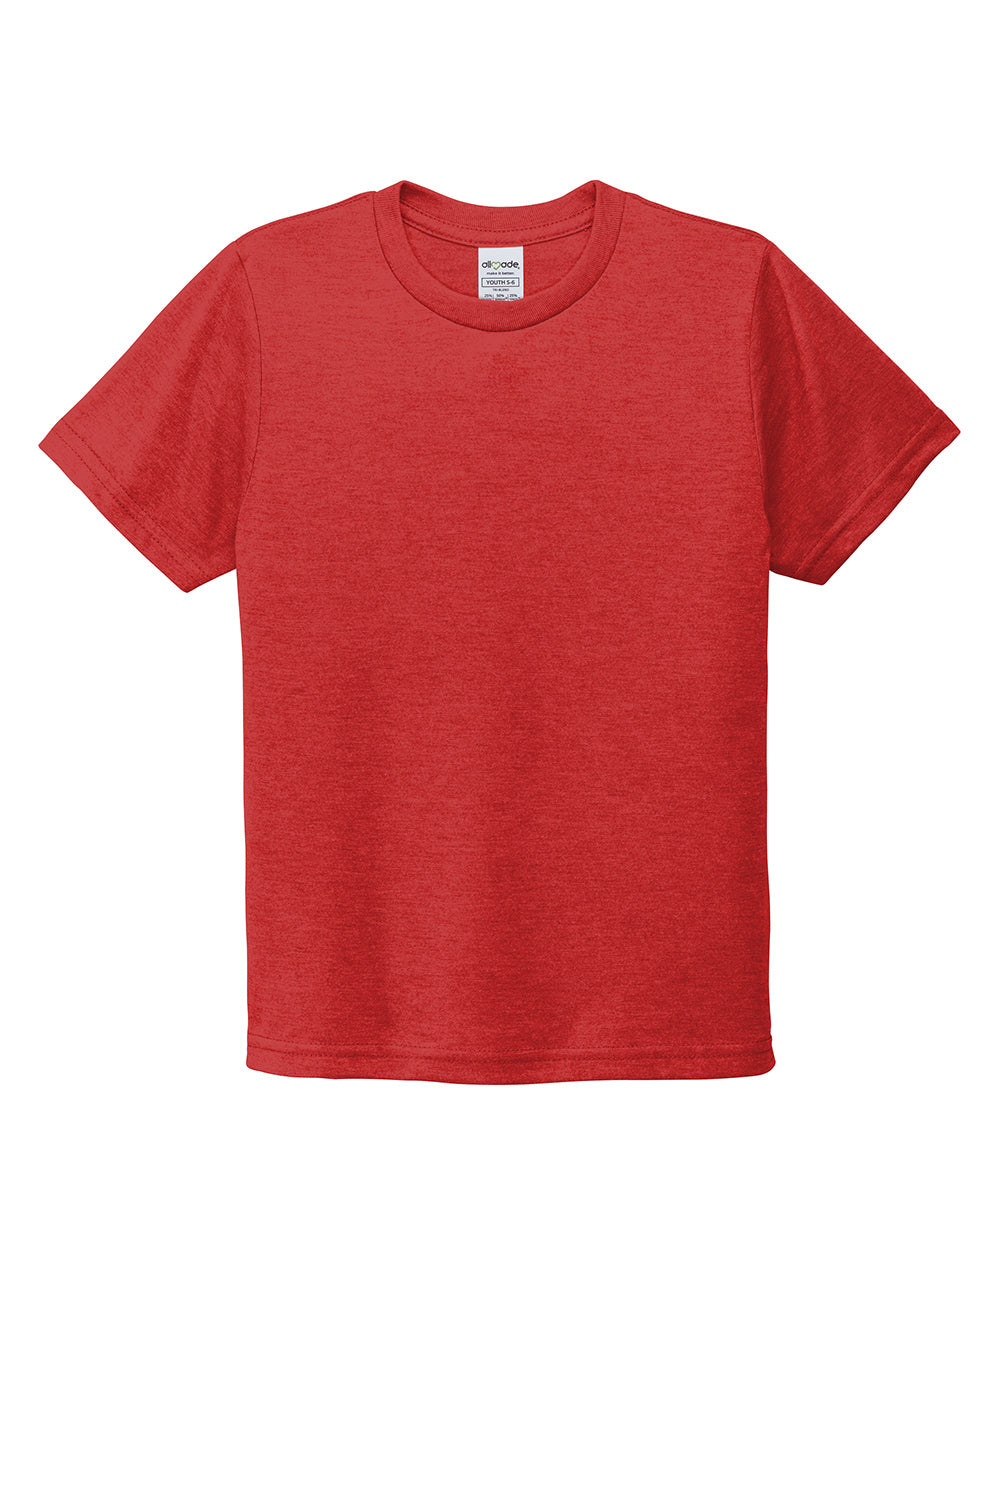 Allmade AL207 Youth Short Sleeve Crewneck T-Shirt Rise Up Red Flat Front